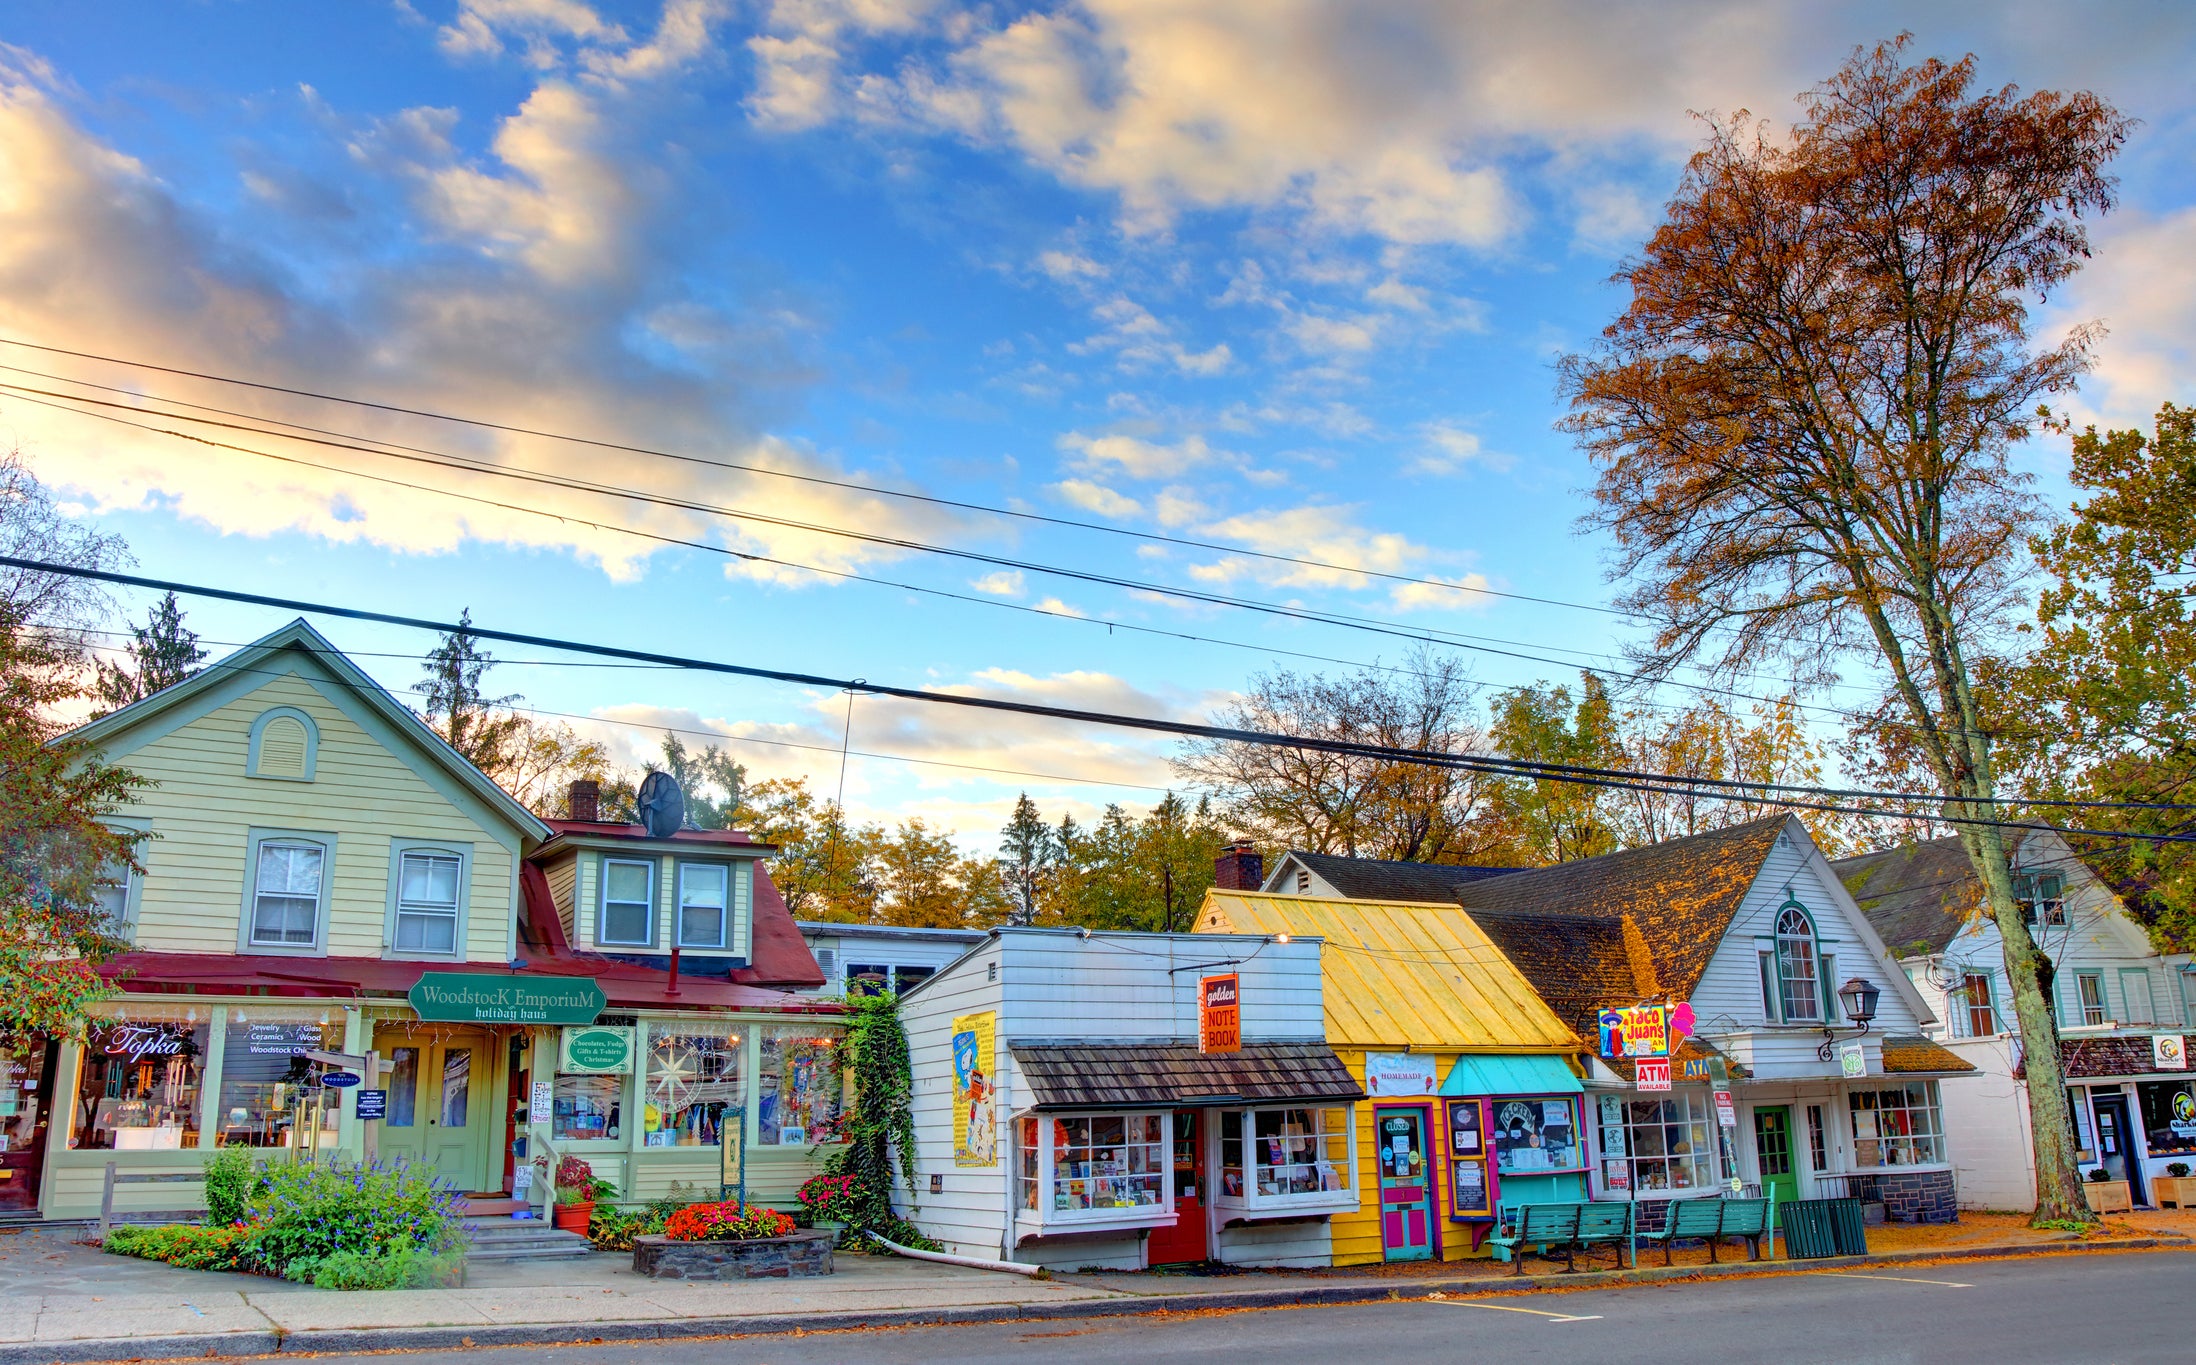 Woodstock has great music, meals and plenty of spiritual gift shops